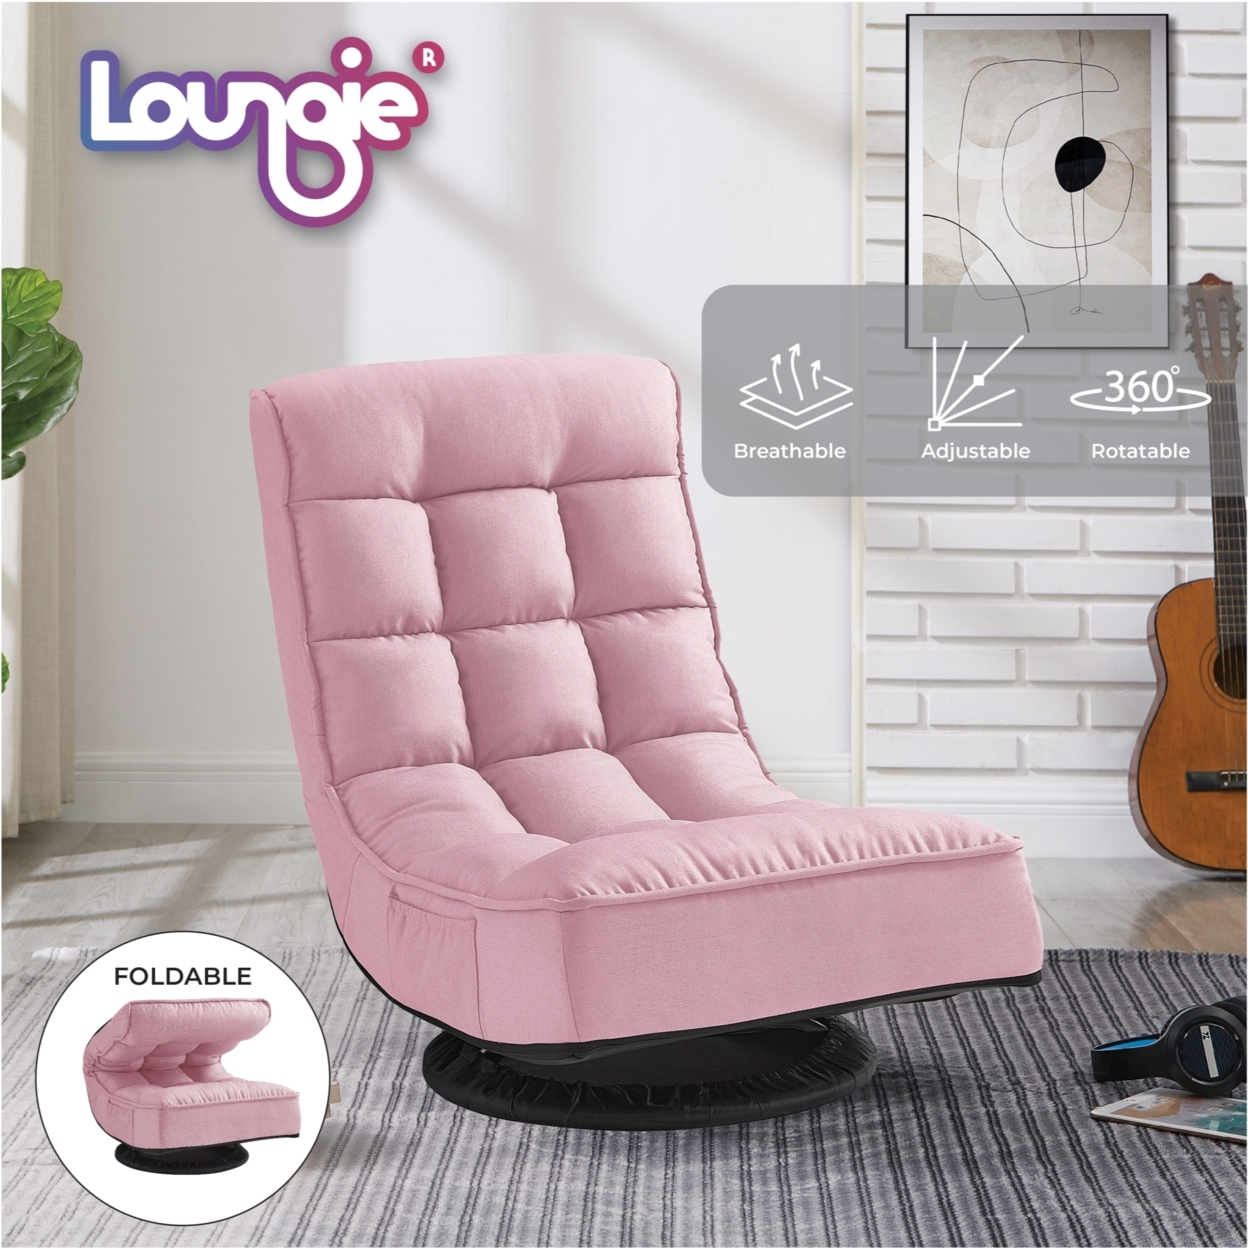 Myracle Chair - 3 Adjustable Positions, 360 Swivel, Steel Rod Construction, Washable Cover - Pink